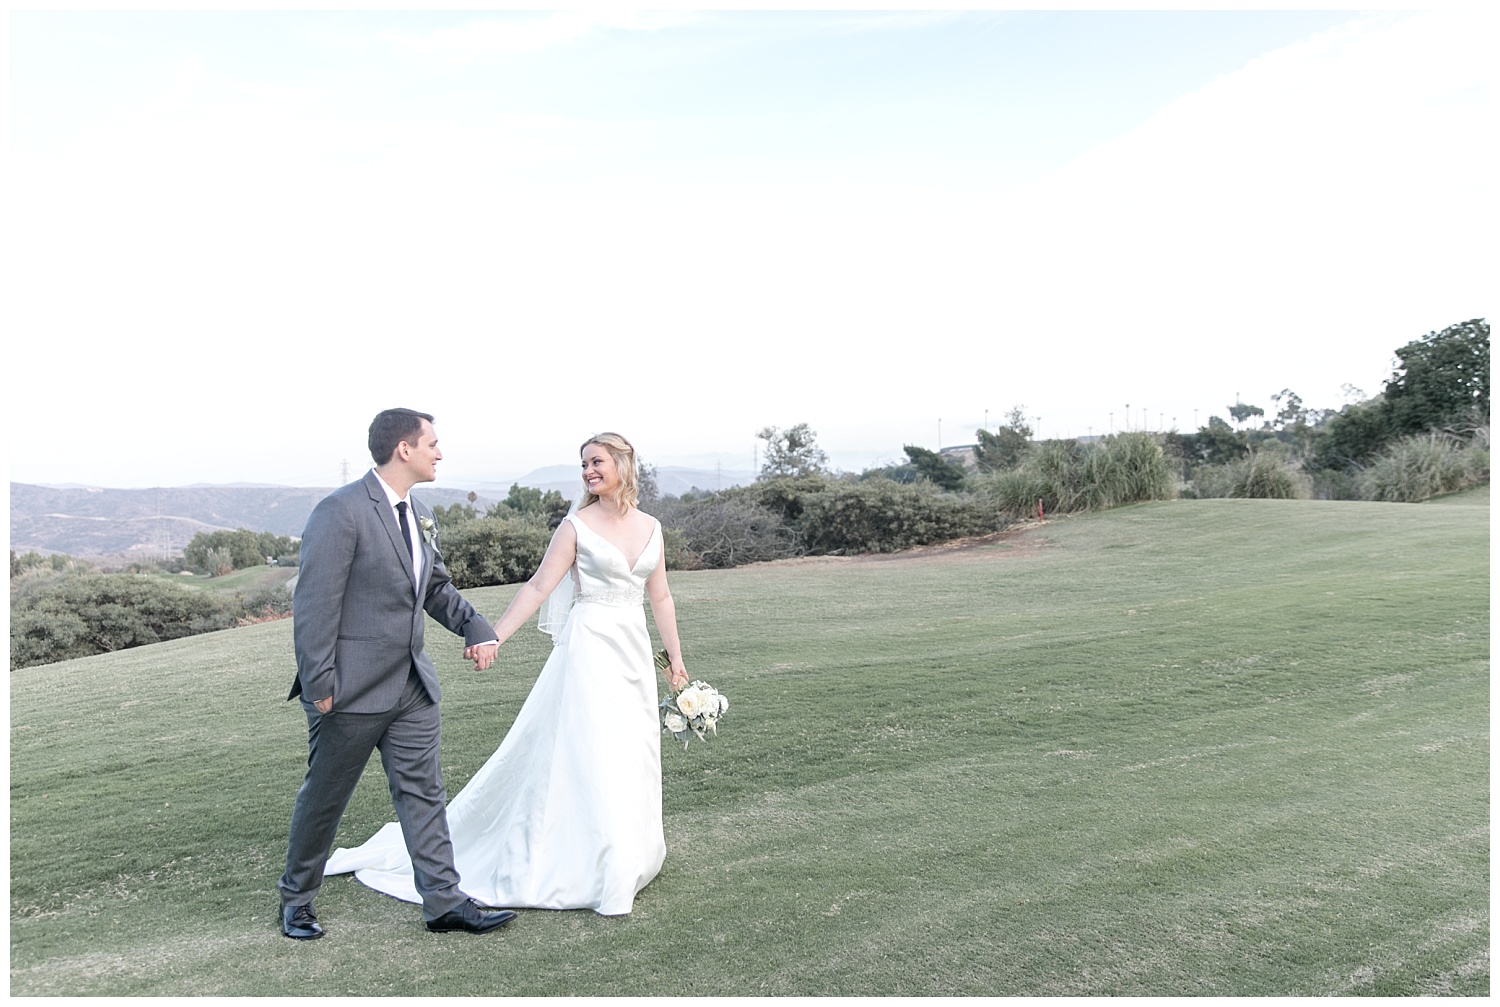 catherine + tim - bella collina golf course - san clemente california - wedding party - bride and groom couples portraits-0250